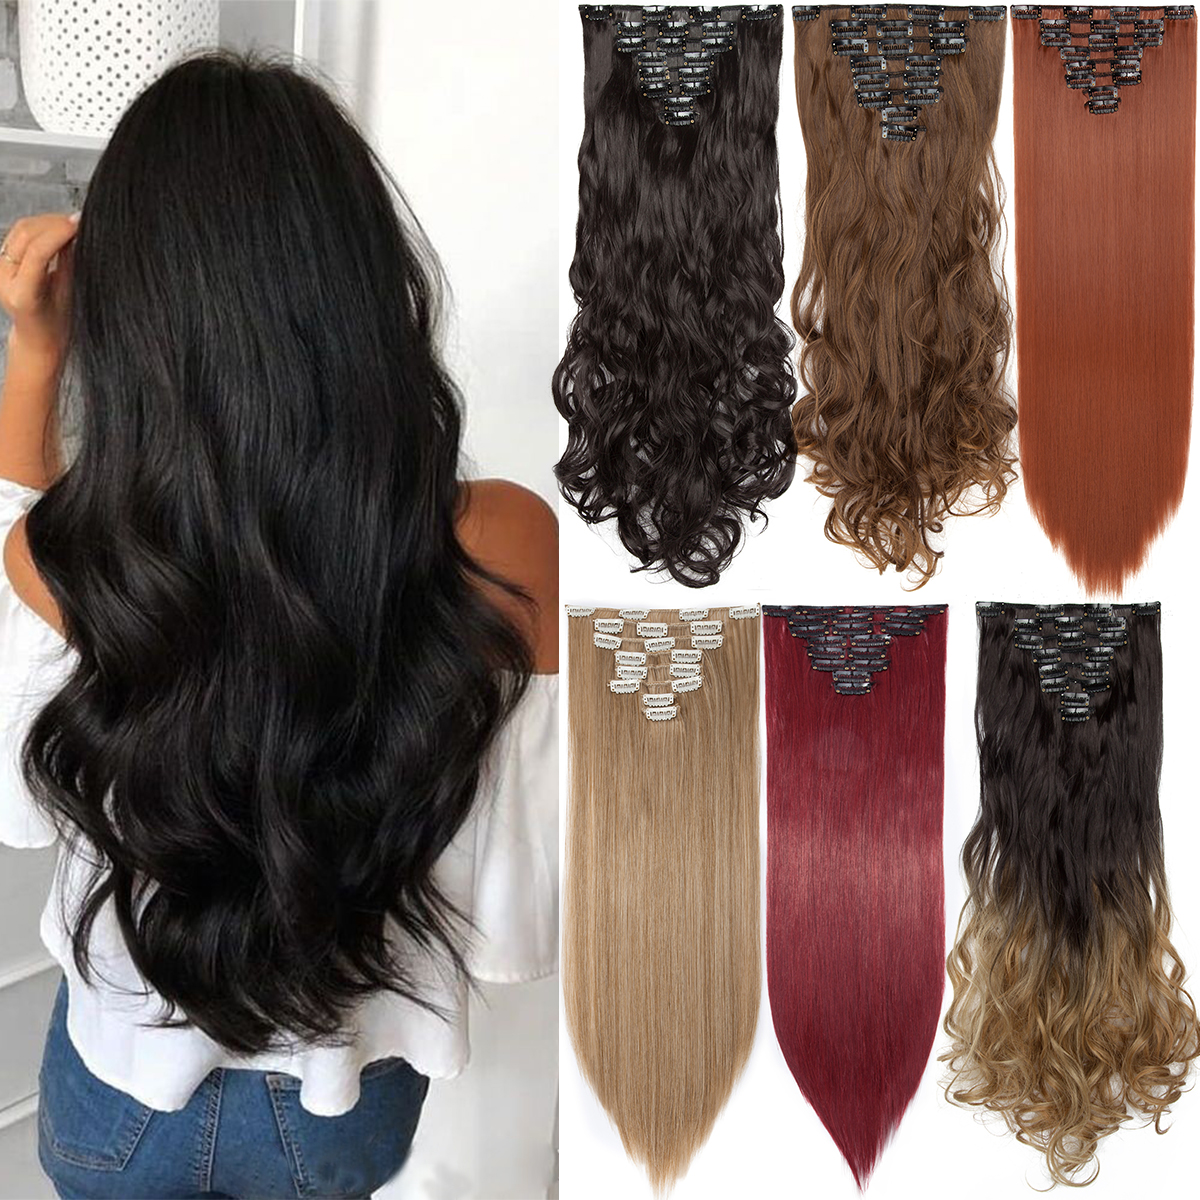 Benehair Clip in Hair Extensions Full Head Long Thick 8 Pieces Hair 18 Clips Curly Wavy Straight Hairpieces 100% Real Natural as Human Best Hair Set 24'' Curly Dark Black - image 1 of 11